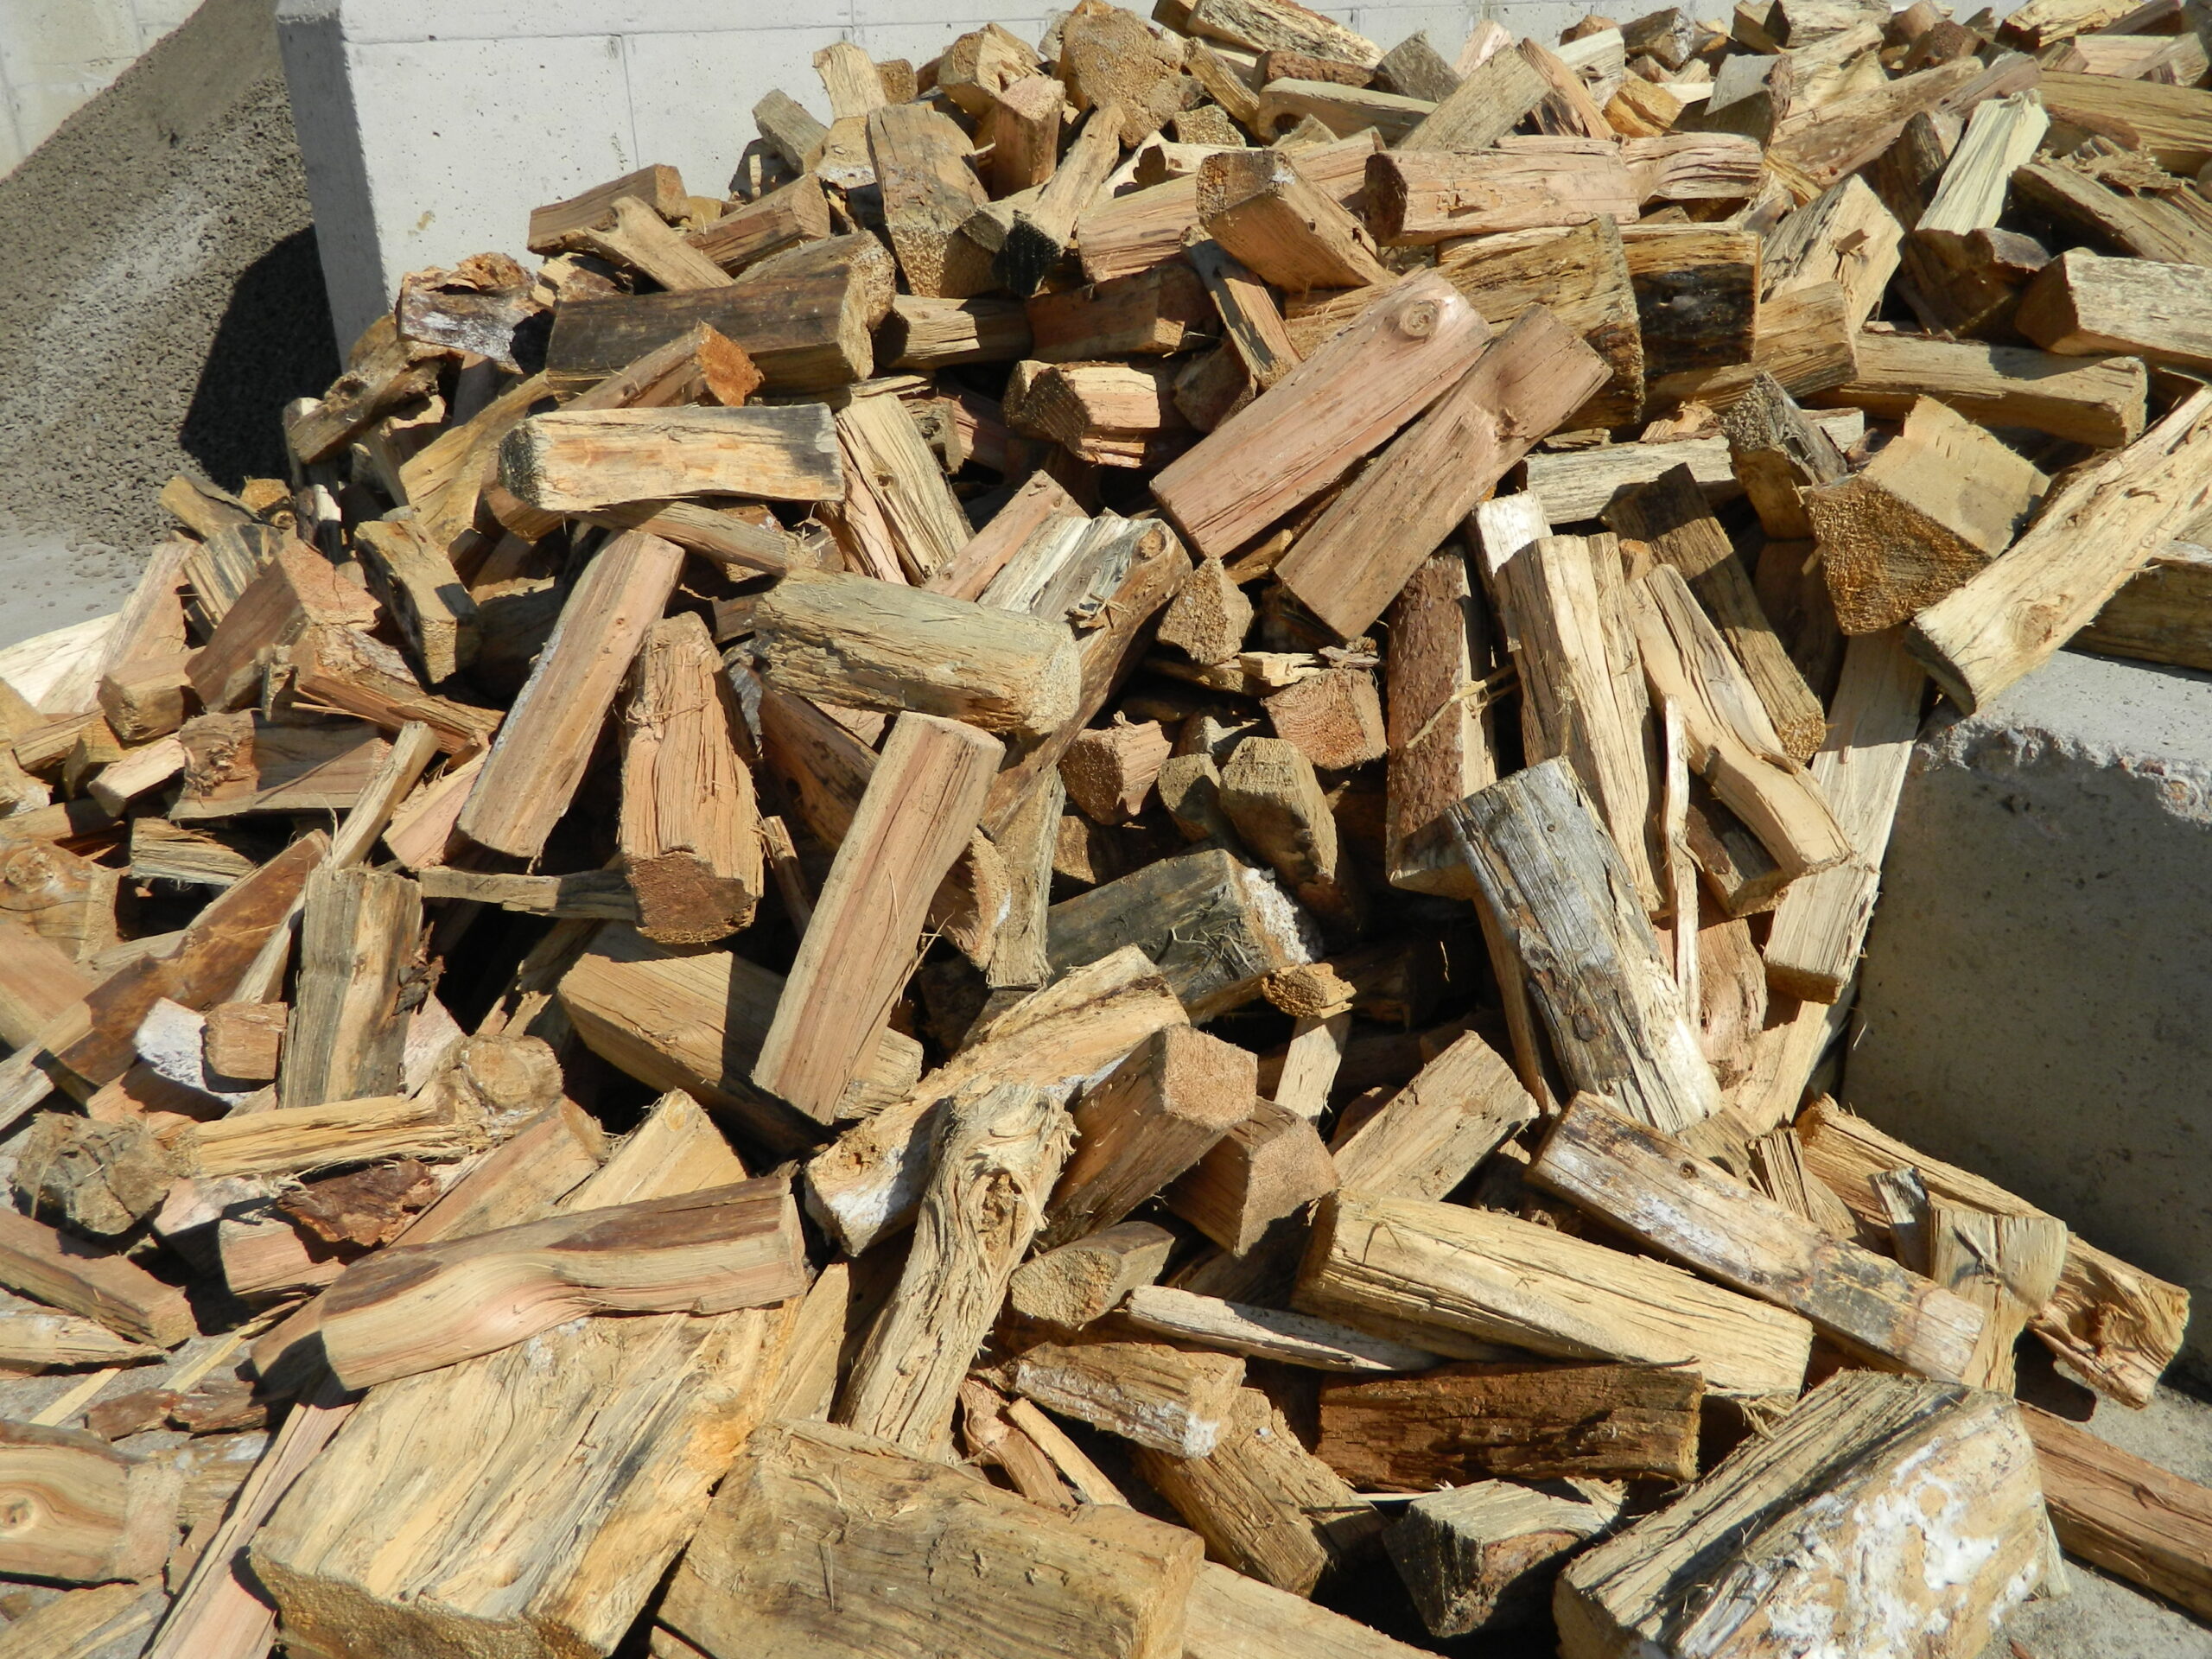 Fire Wood (priced by the ton) – Bedrock Landscaping